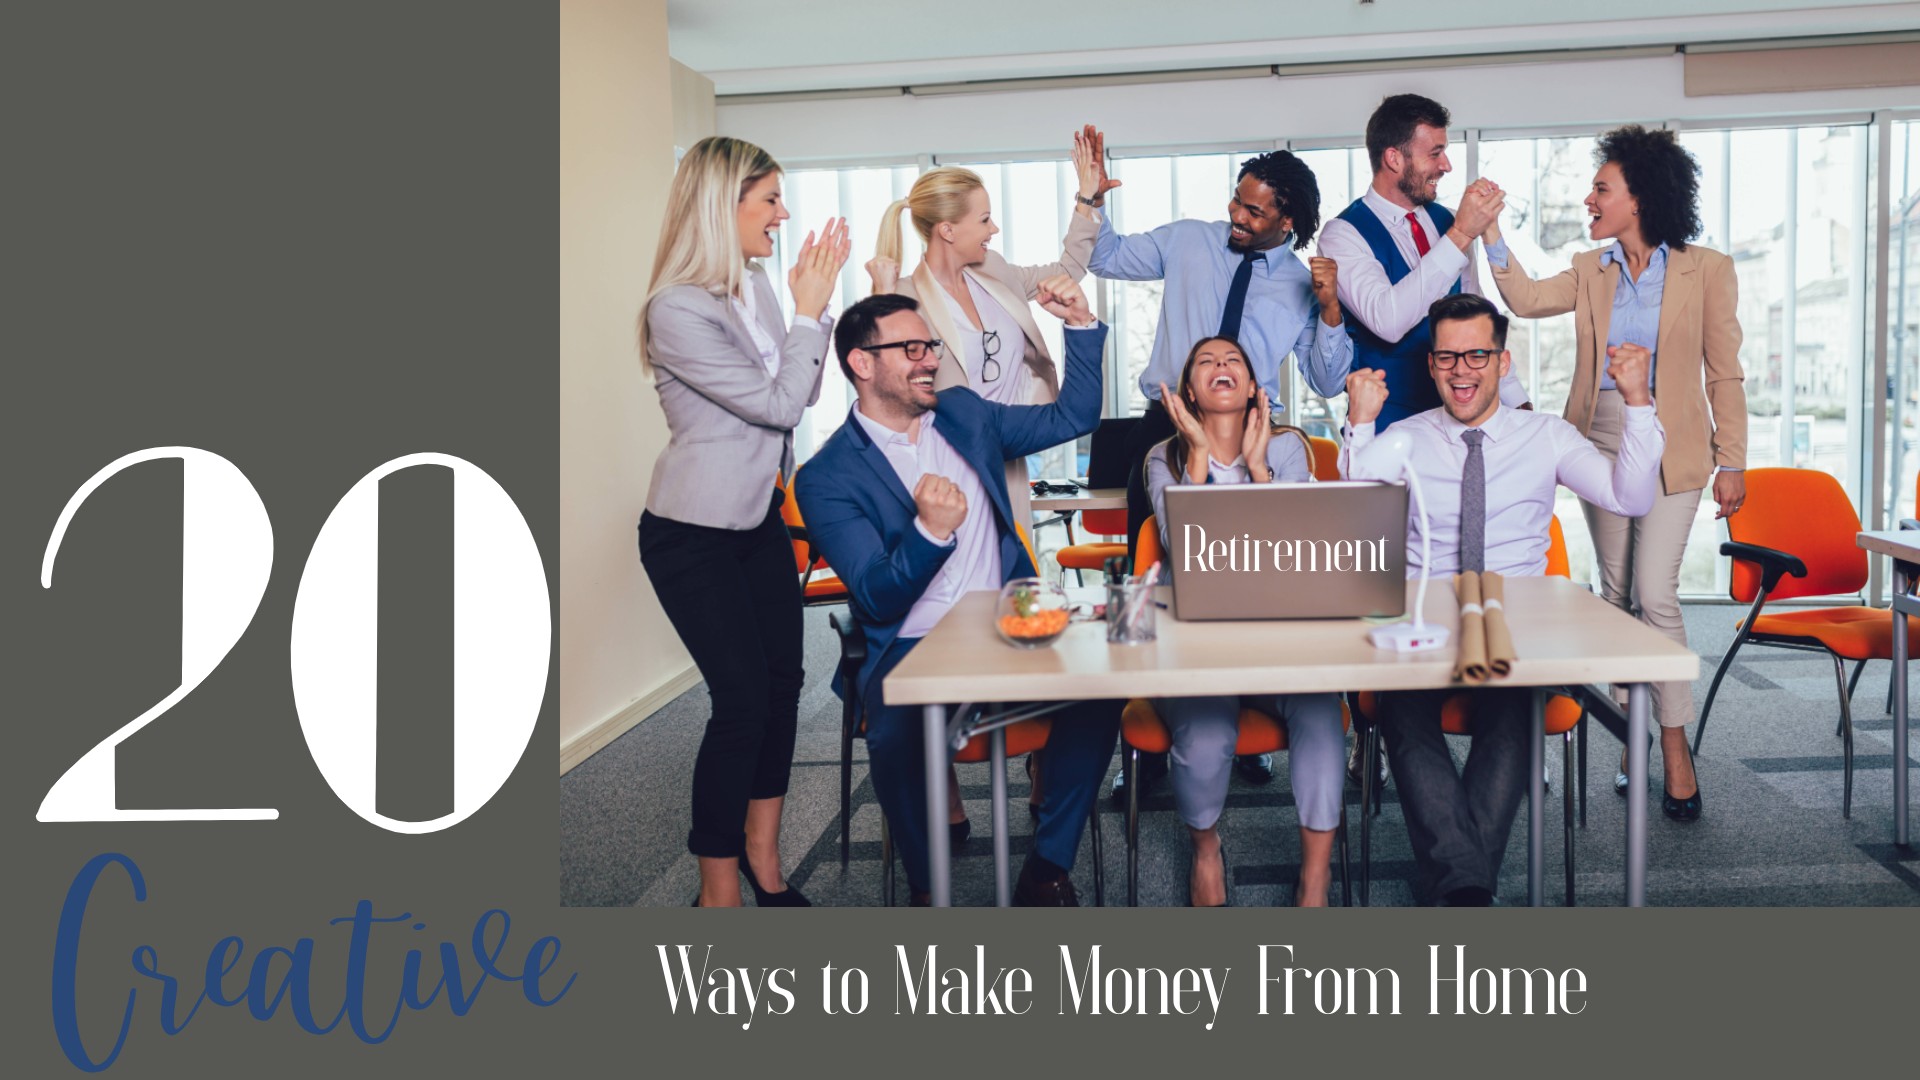 20 Creative Ways to Make Money From Home